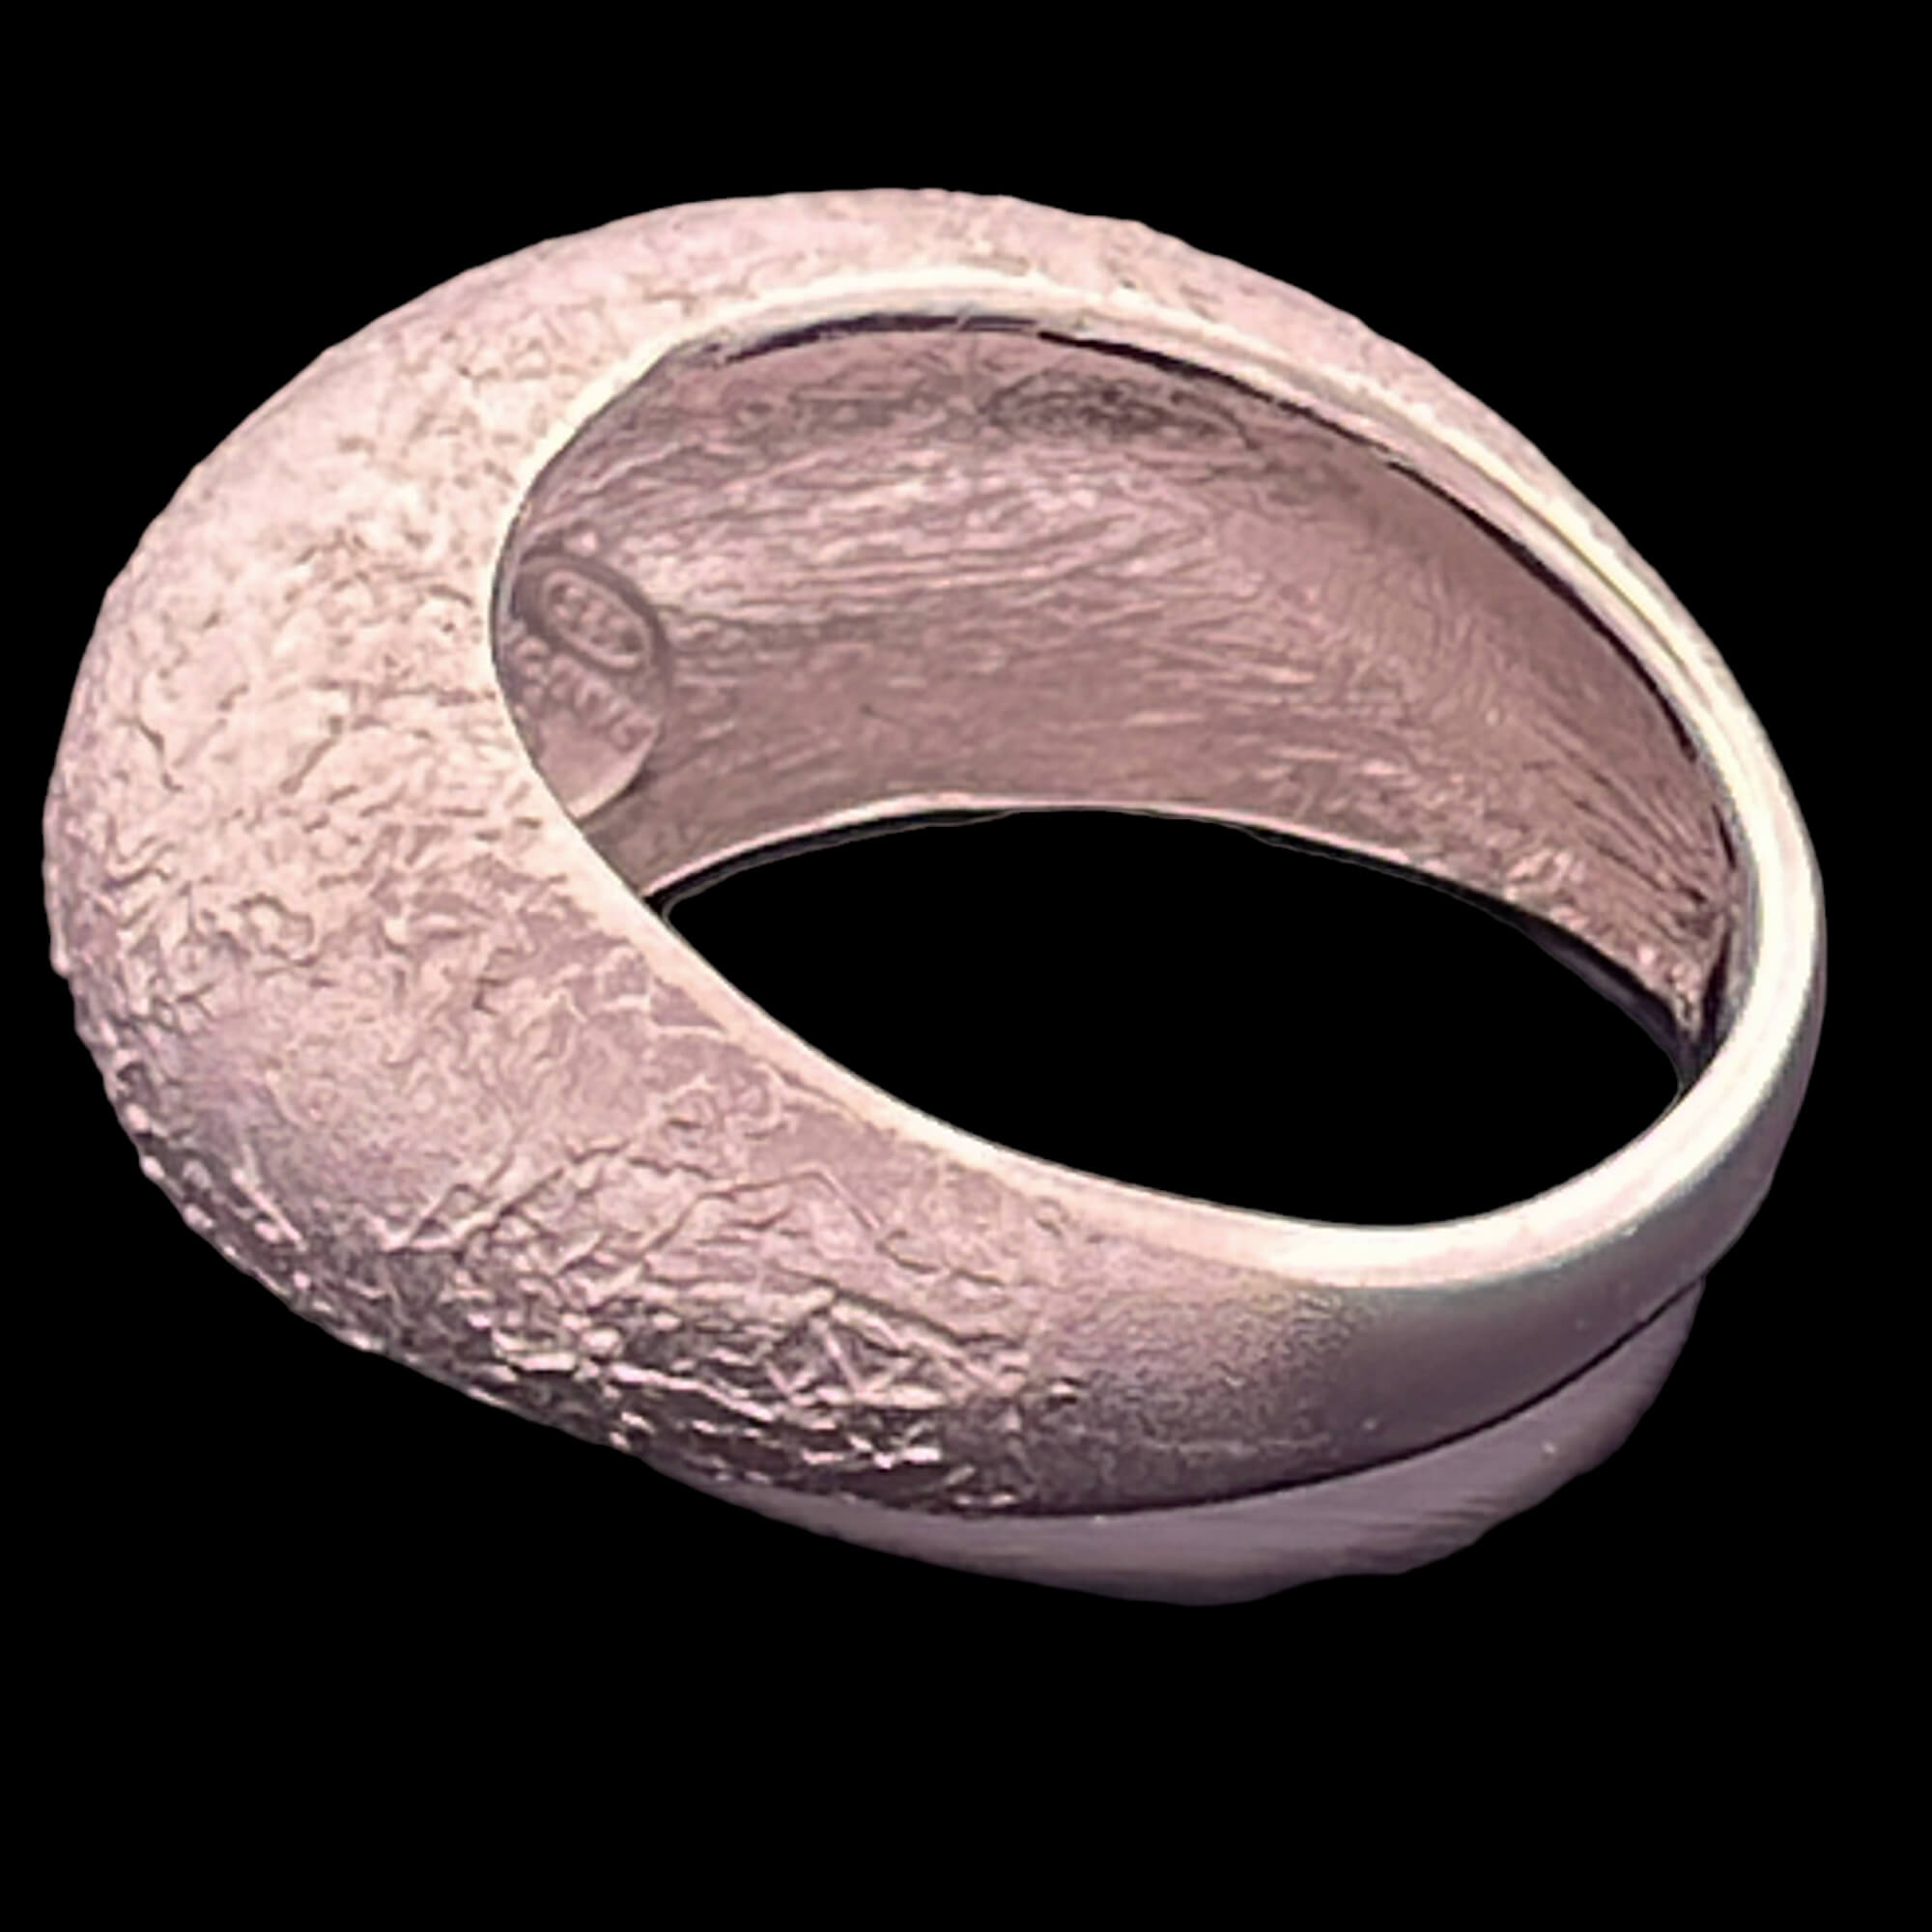 Processed silver and matte ring